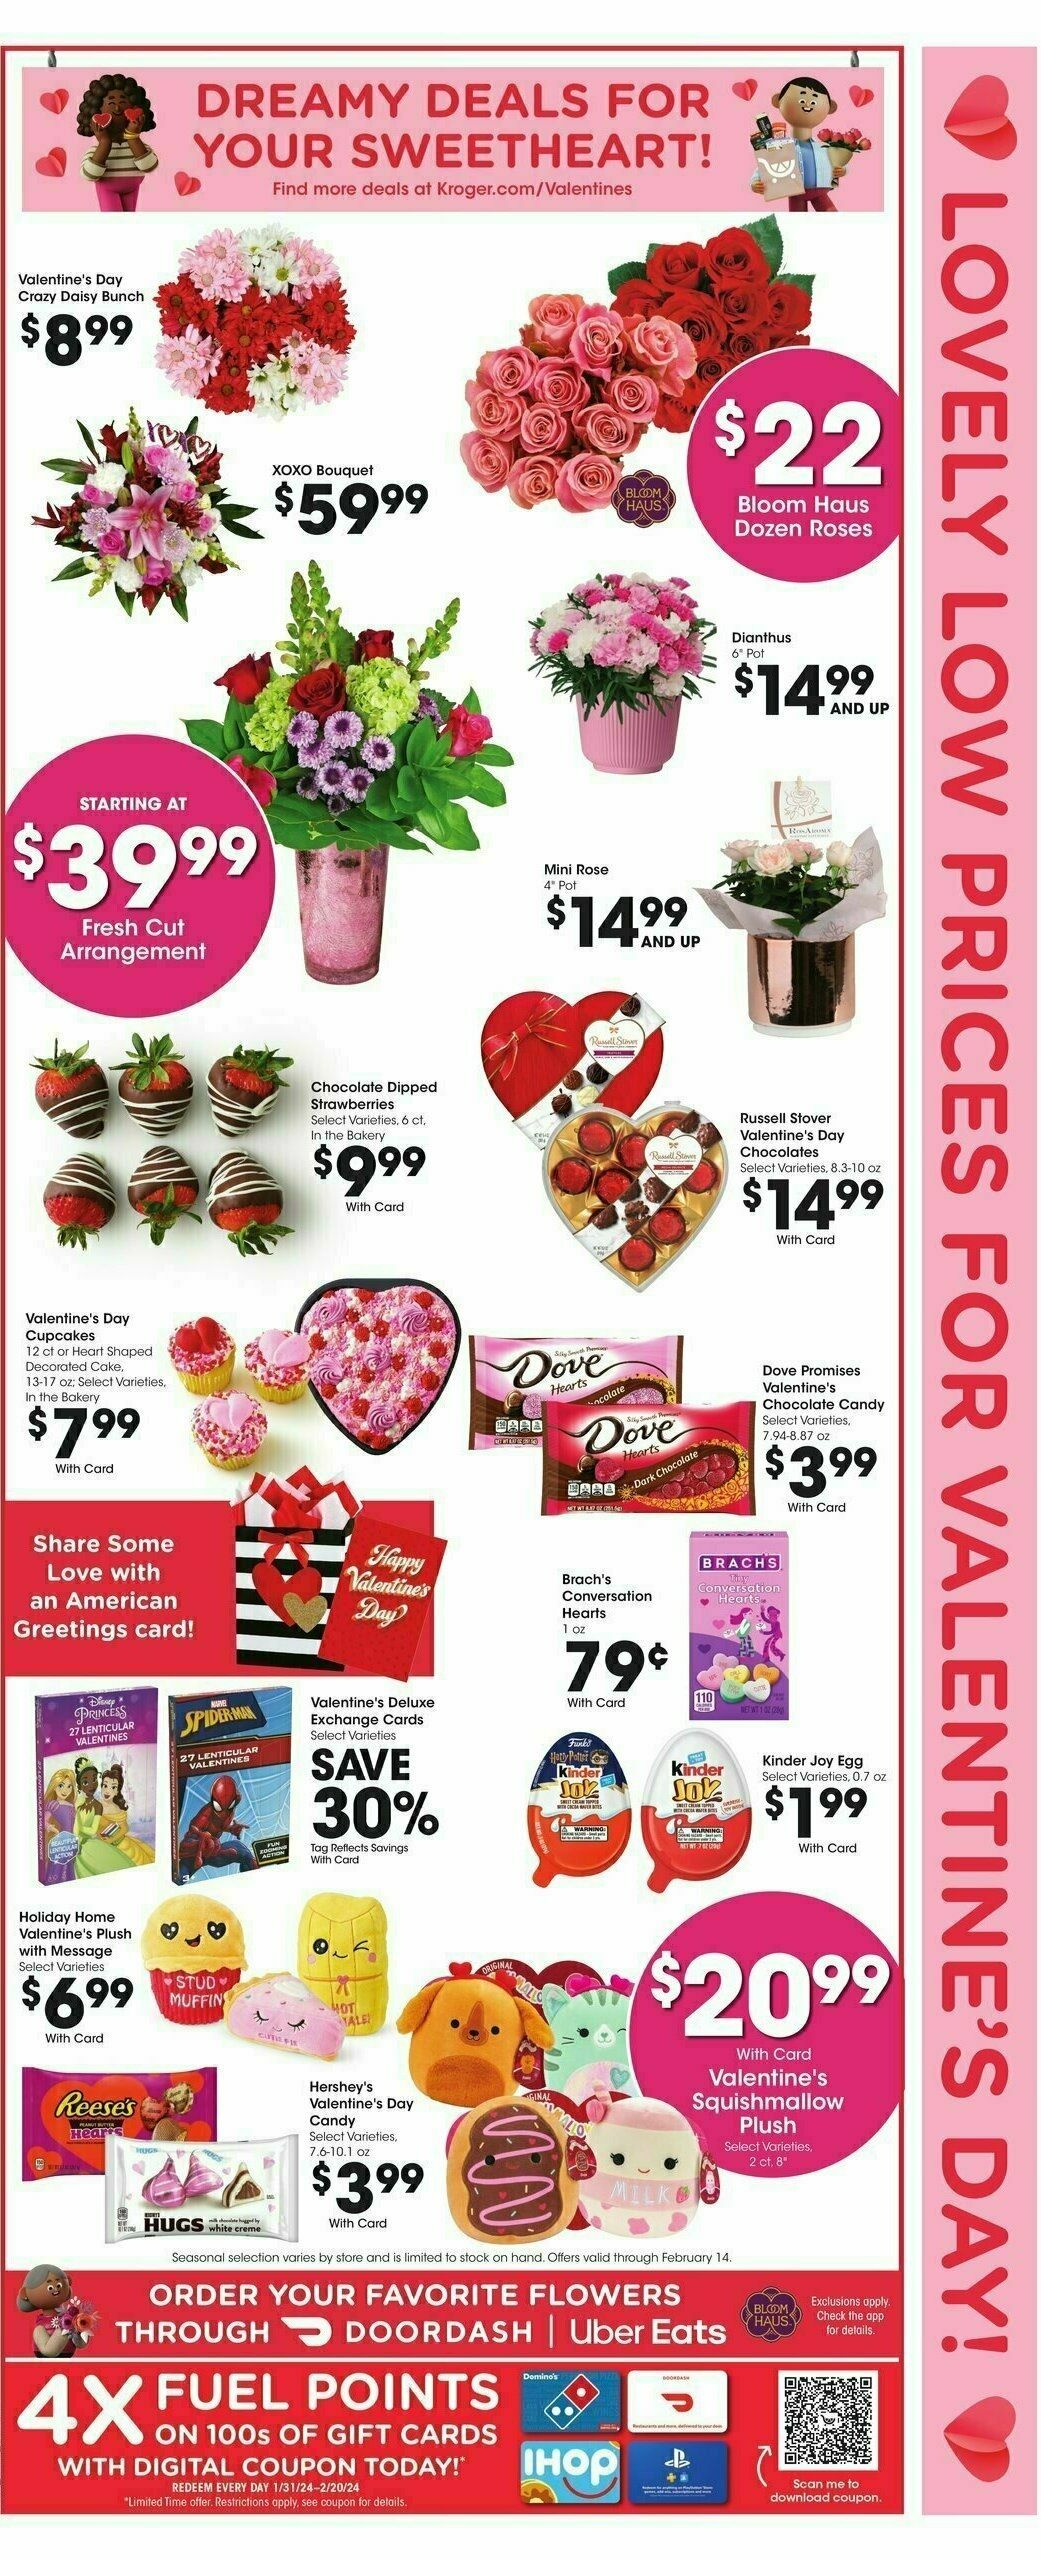 Kroger Weekly Ad from February 7